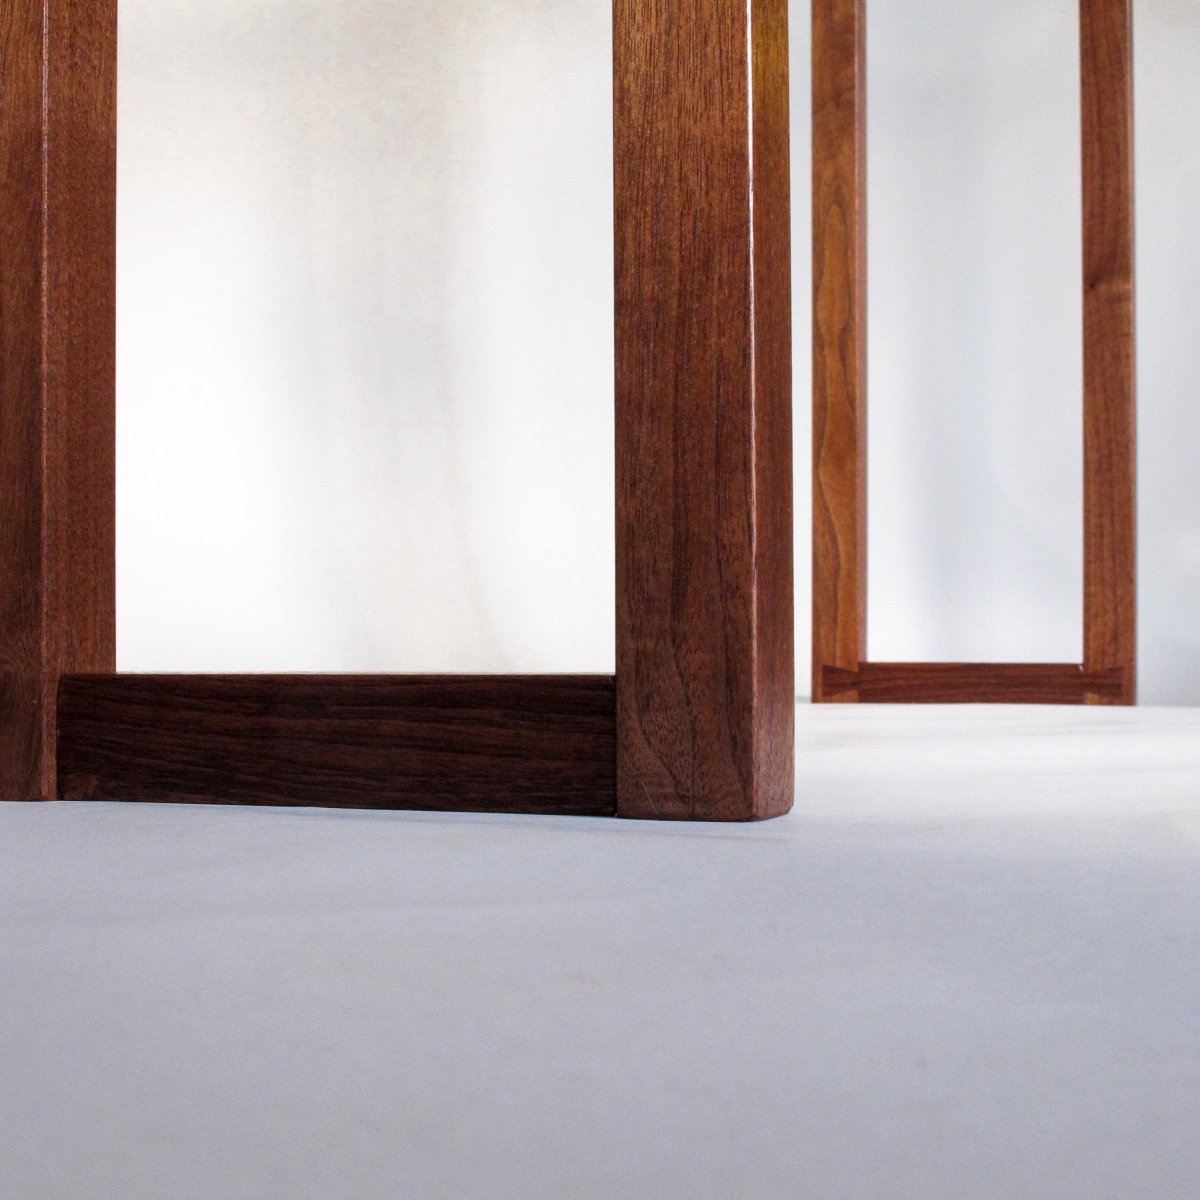 Hand-cut dovetail feet details on an entryway console table by Mokuzai Furniture.